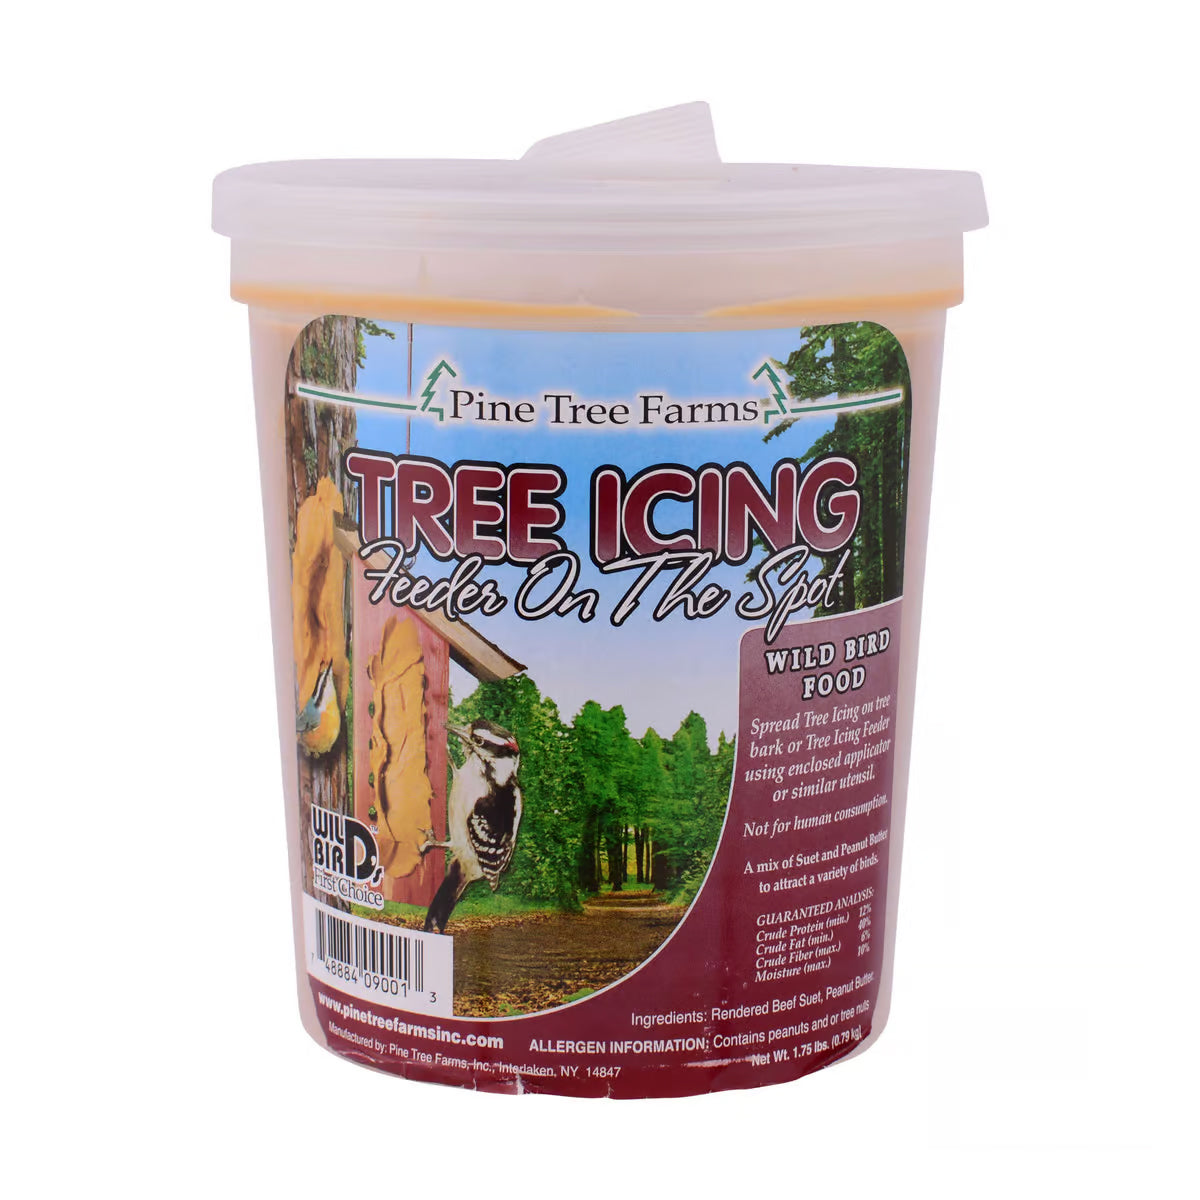 Pine Tree Farms Tree Icing - Case of 8